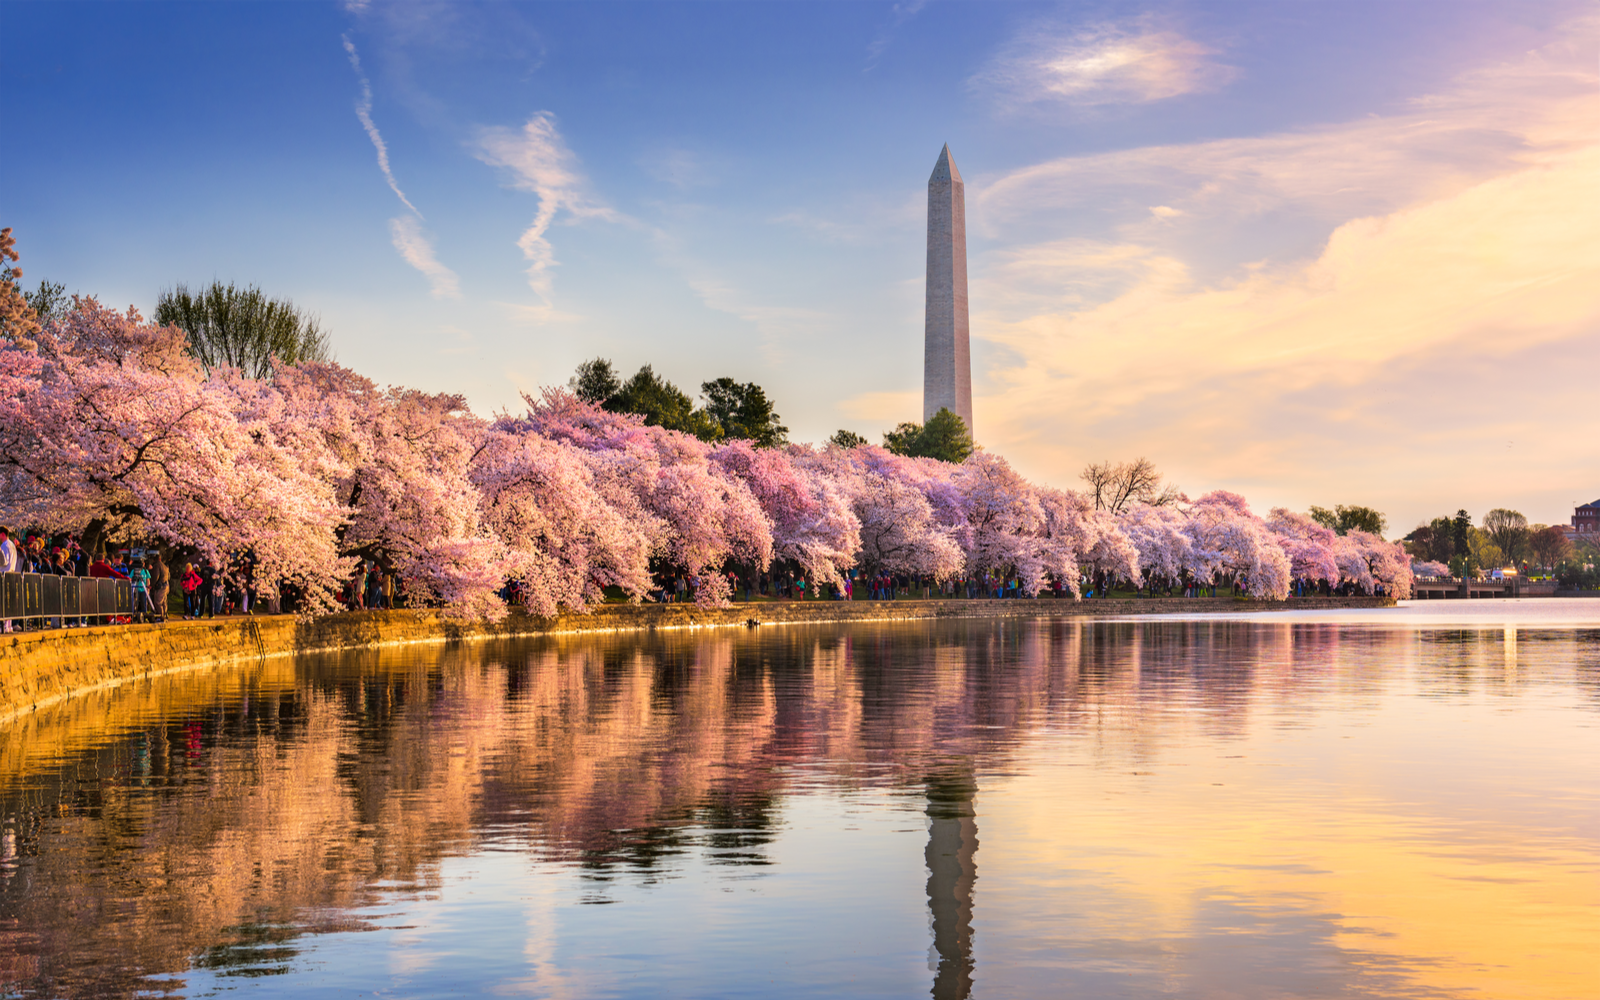 17 Things to Do in Washington, D.C. in 2022